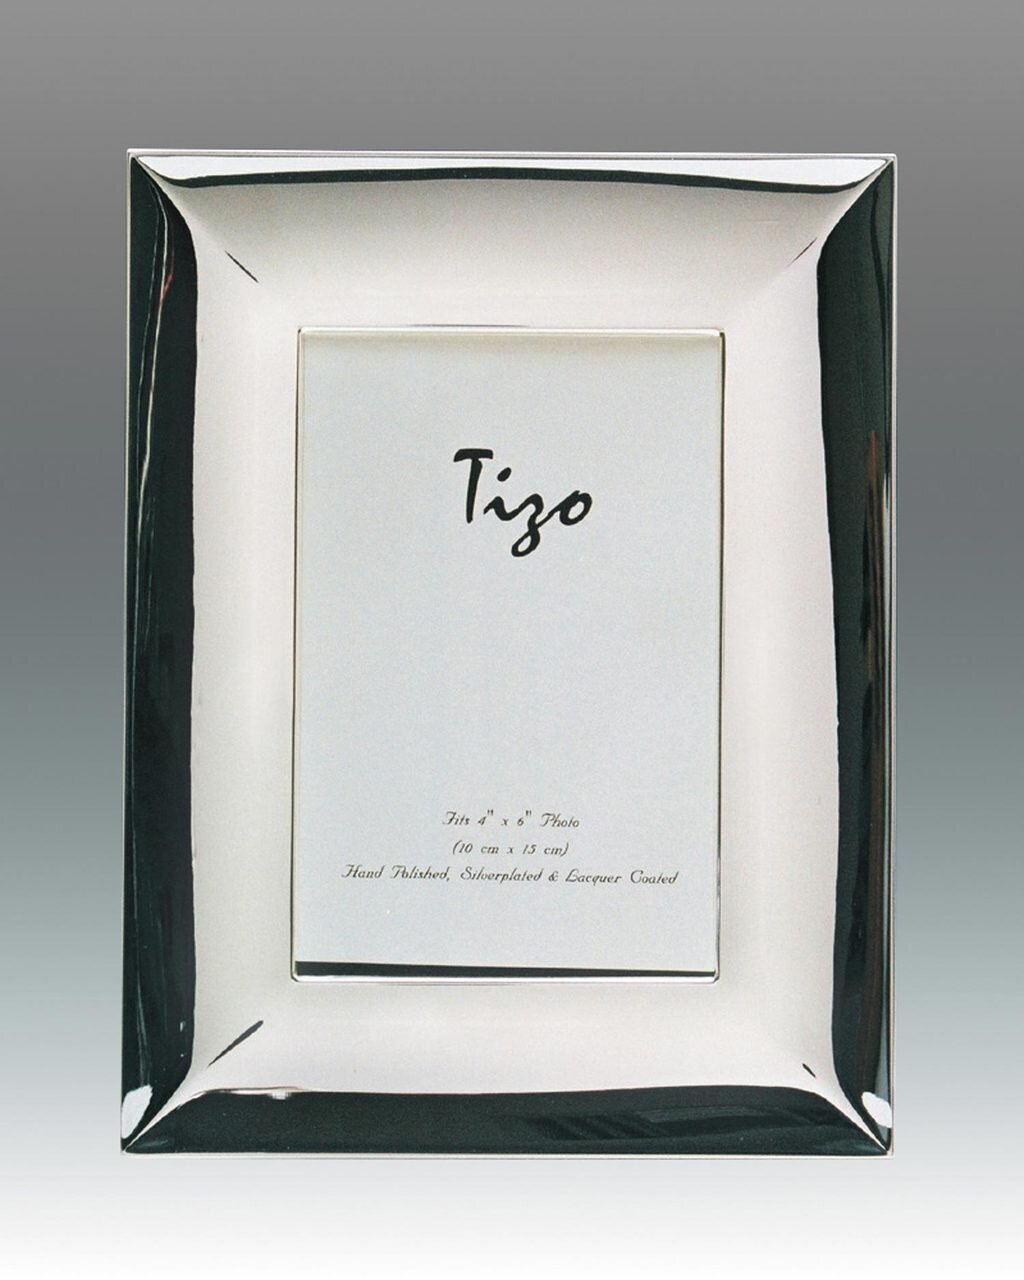 Tizo Classic Wide 4 x 6 Inch Silver Plated Picture Frame